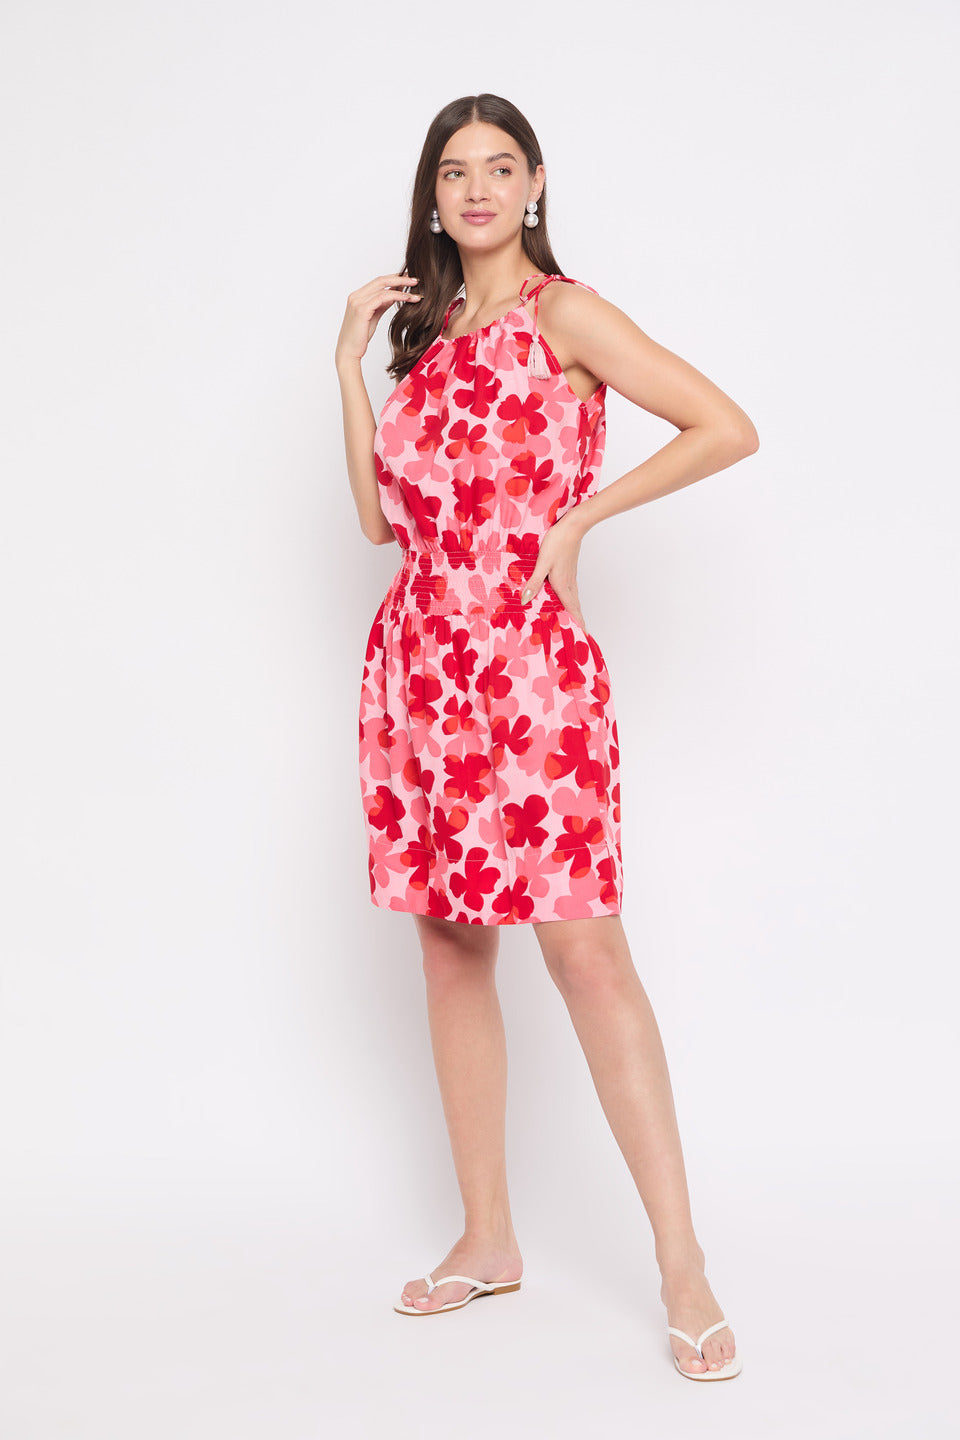 Floral Print Red & Pink Rayon Mini Dress For Women